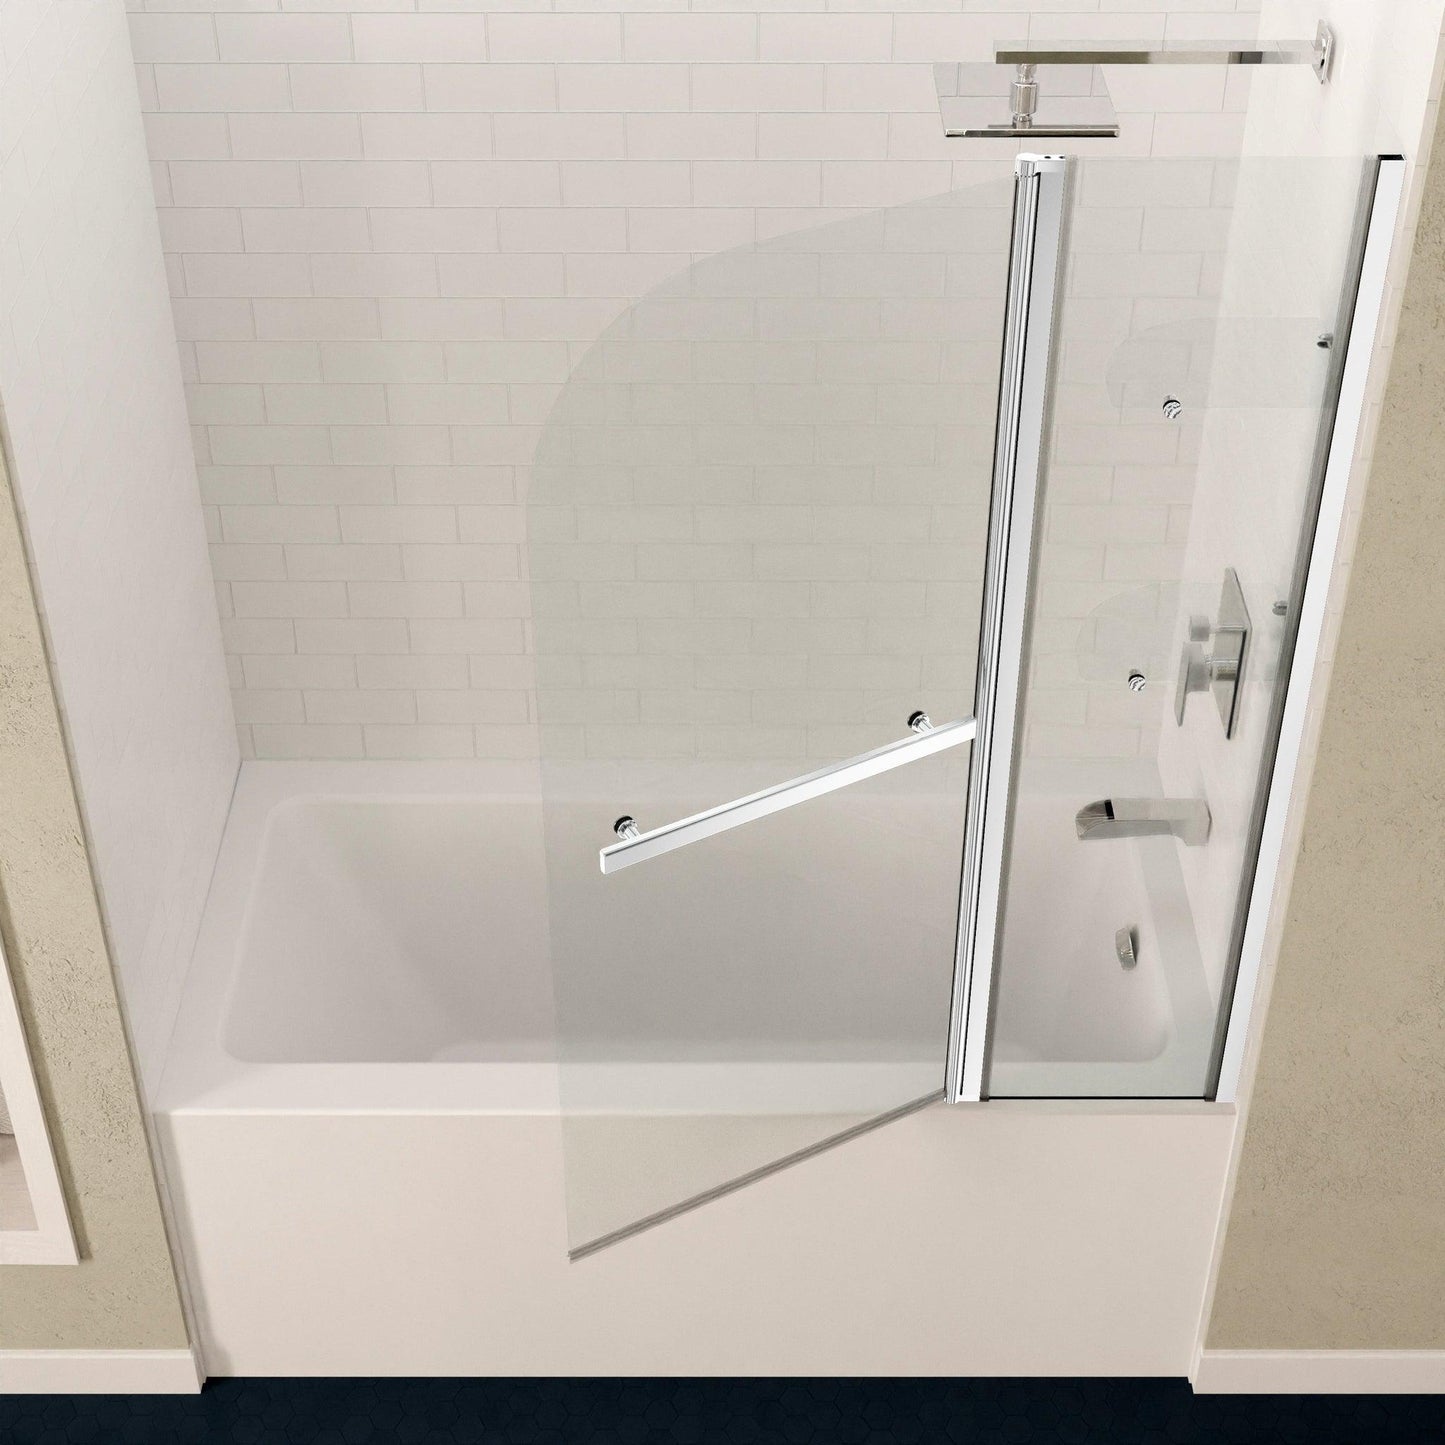 ANZZI Galleon Series White "60 x 30" Alcove Right Drain Rectangular Bathtub With Built-In Flange and Frameless Polished Chrome Hinged Door